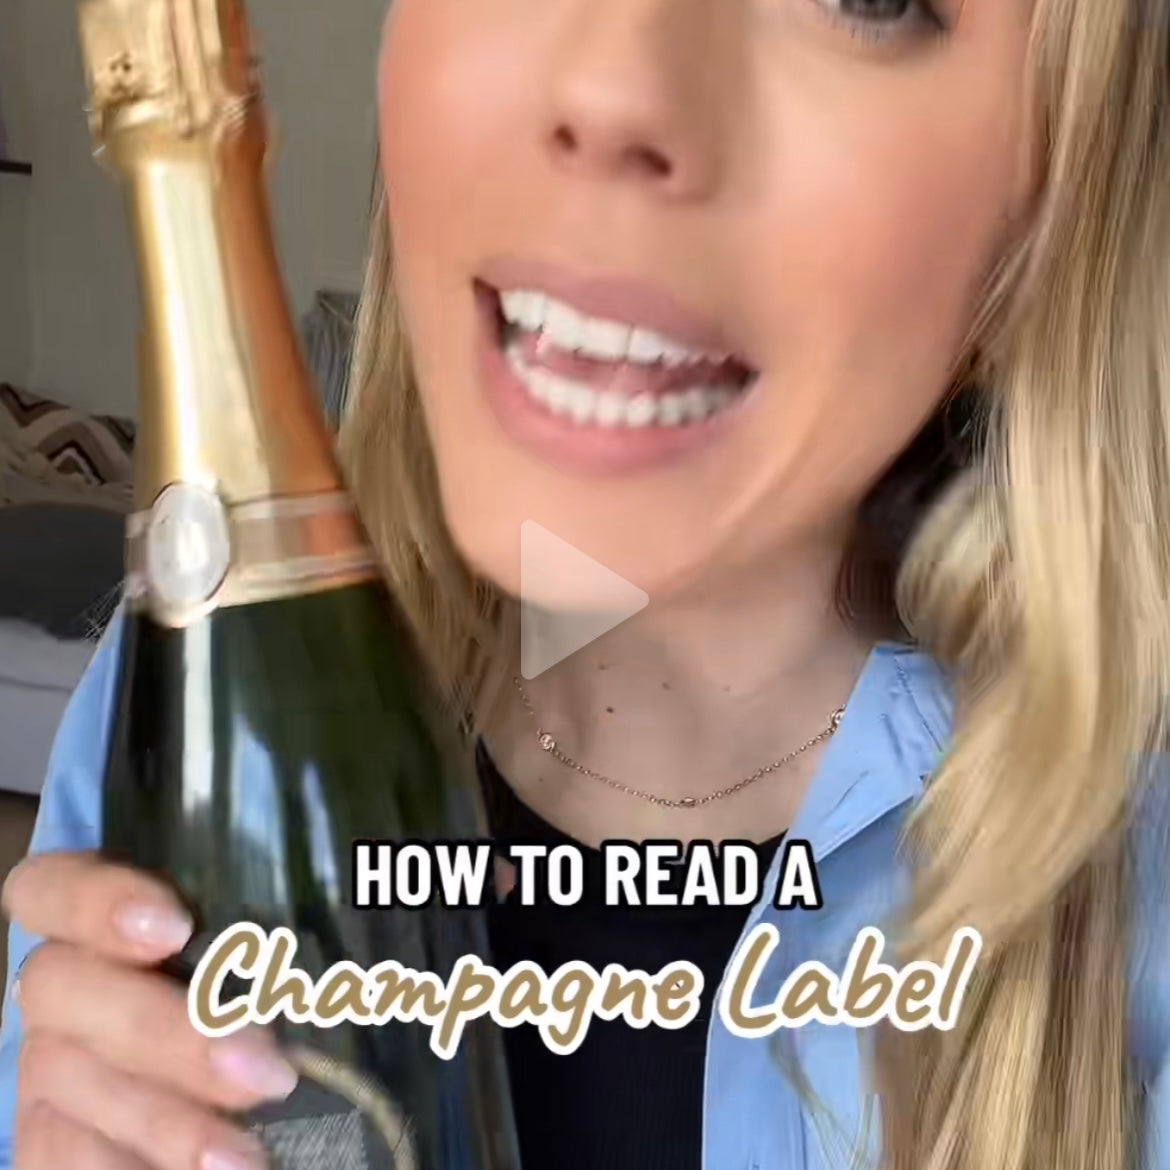 How to read a champagne label